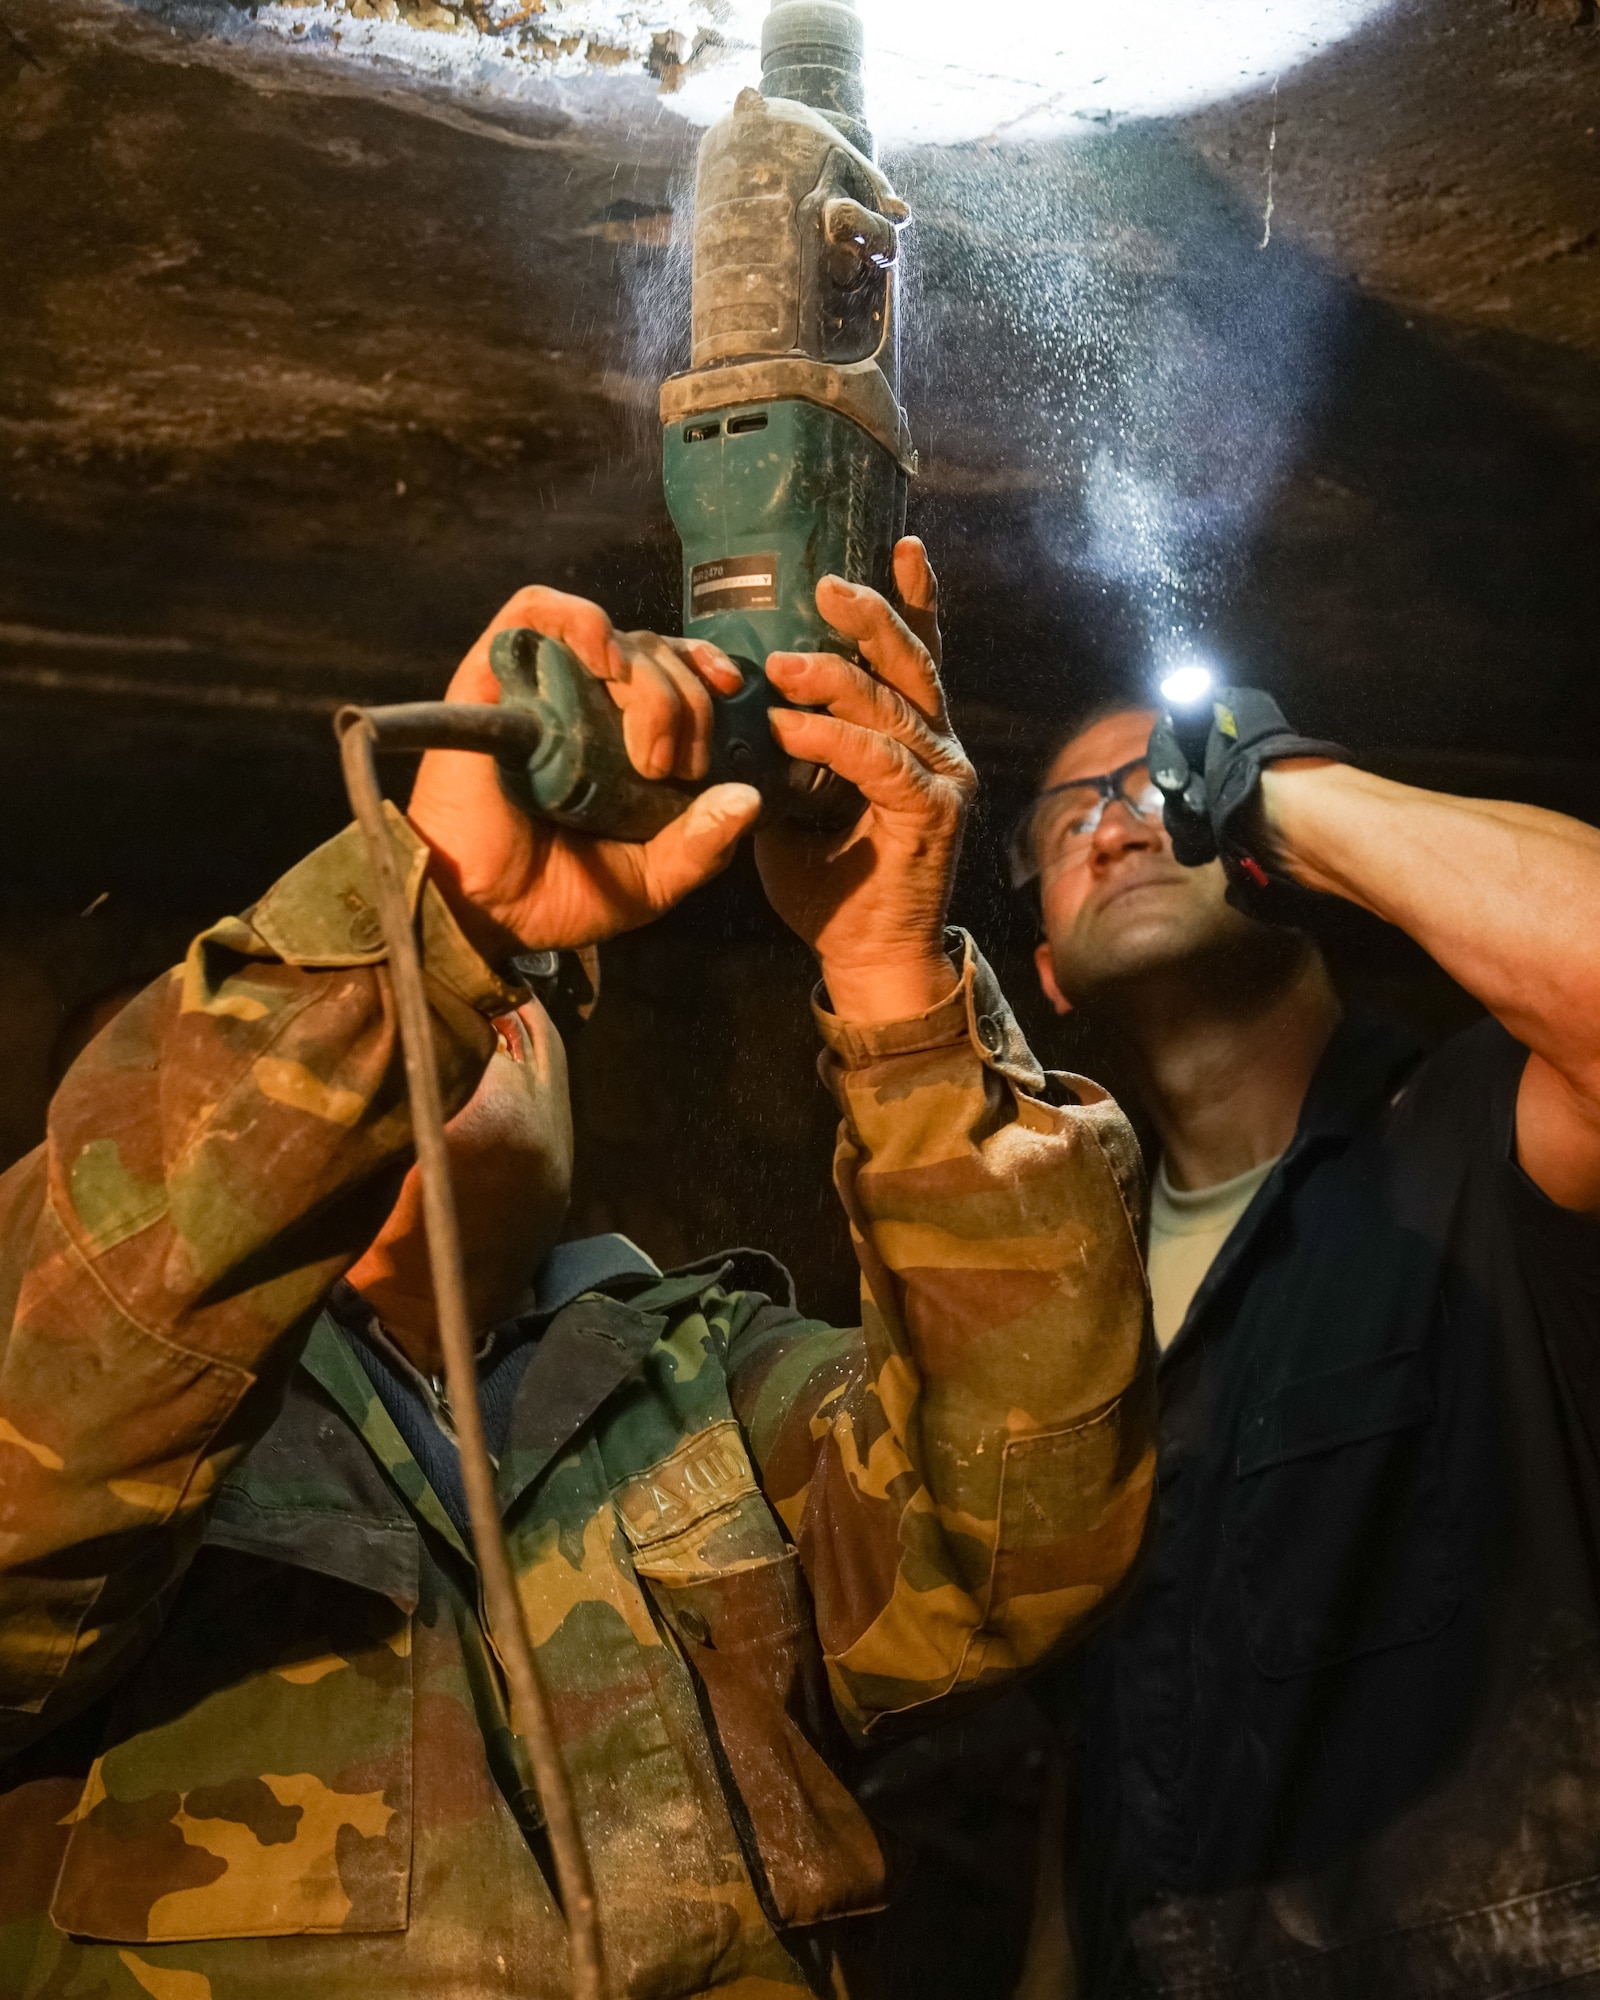 Tech. Sgt. Randy Daniels, right, with the 116th Civil Engineer Squadron, works with an Armenian plumber repairing pipes in the basement of an institution for the elderly during a humanitarian civic assistance project in Yerevan, Armenia, May 13. (U.S. Air Force photo by Senior Master Sgt. Roger Parsons)